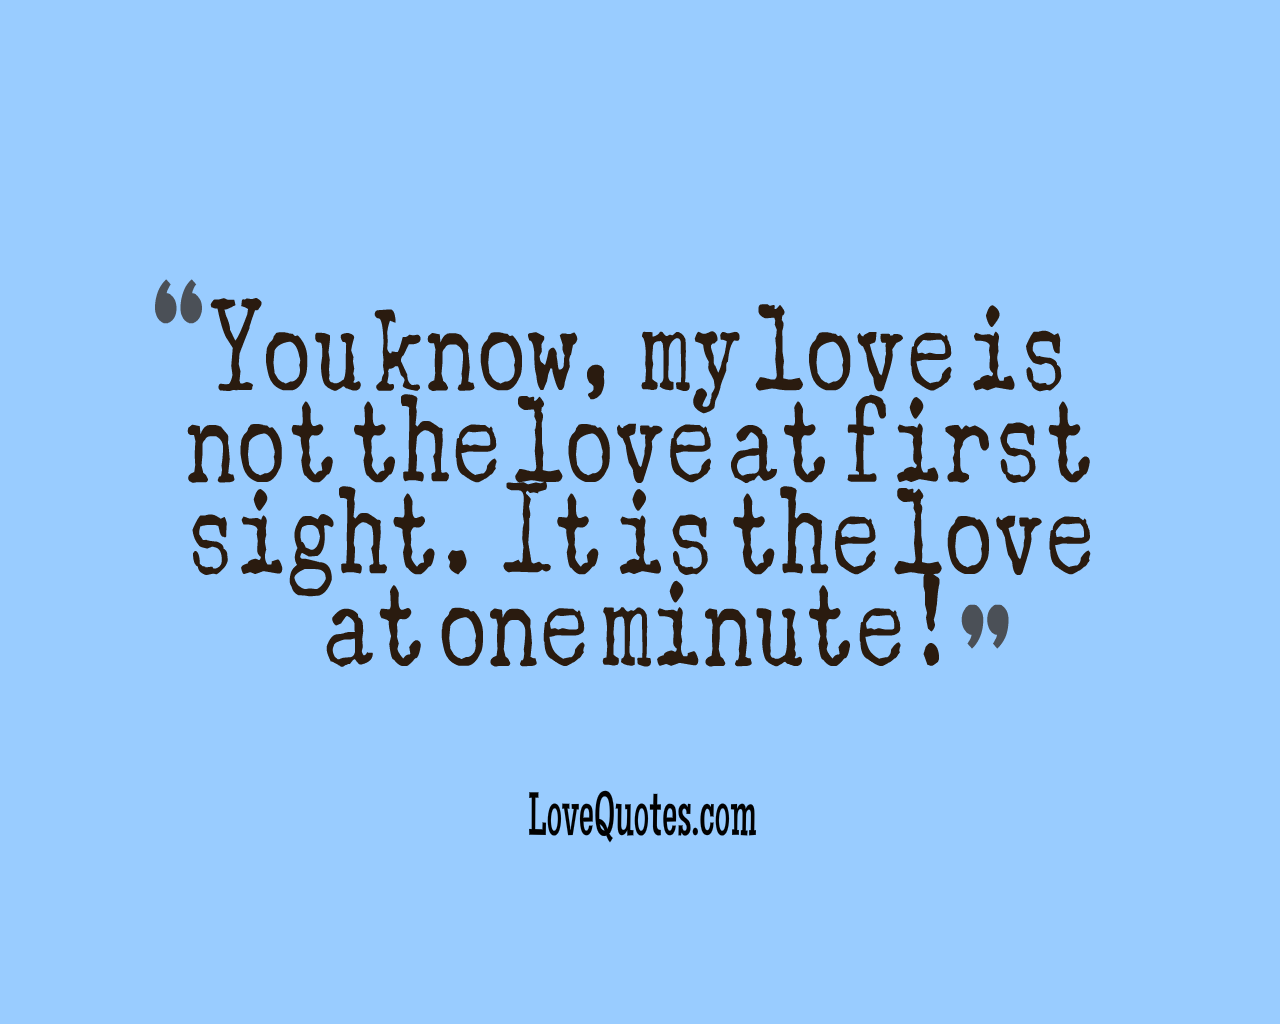 Love At One Minute